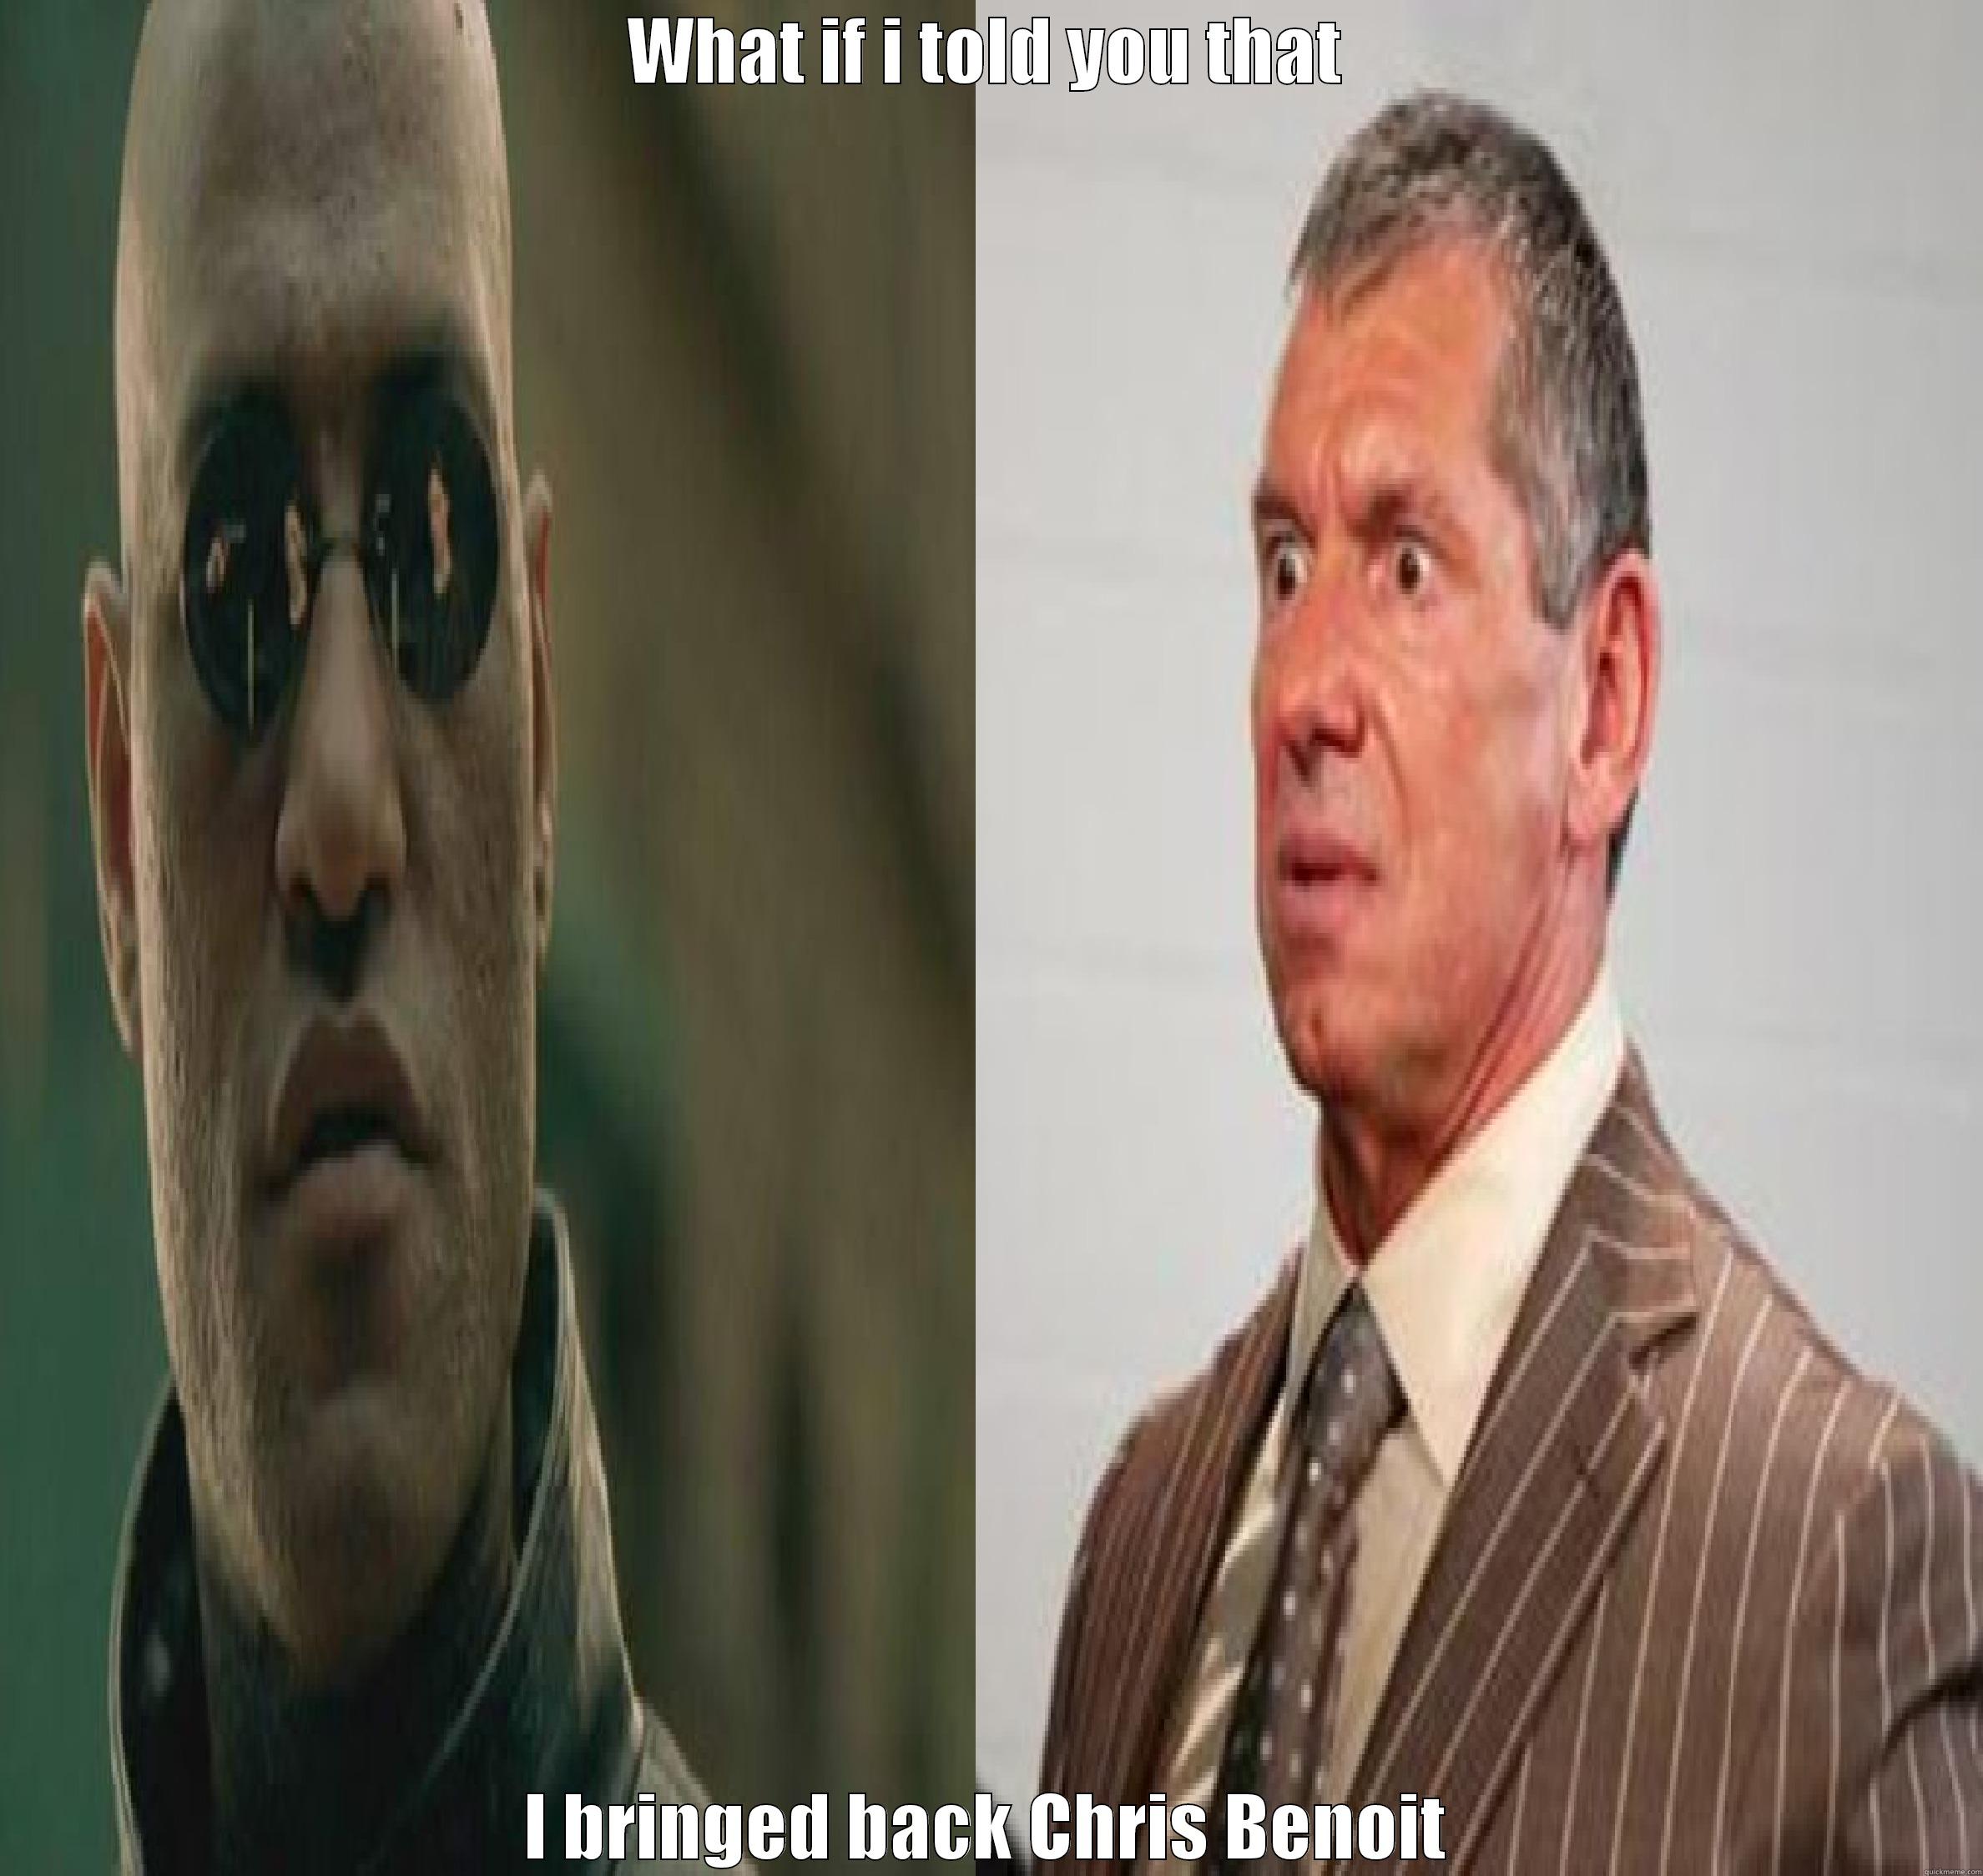 What if WWE - WHAT IF I TOLD YOU THAT I BRINGED BACK CHRIS BENOIT Misc